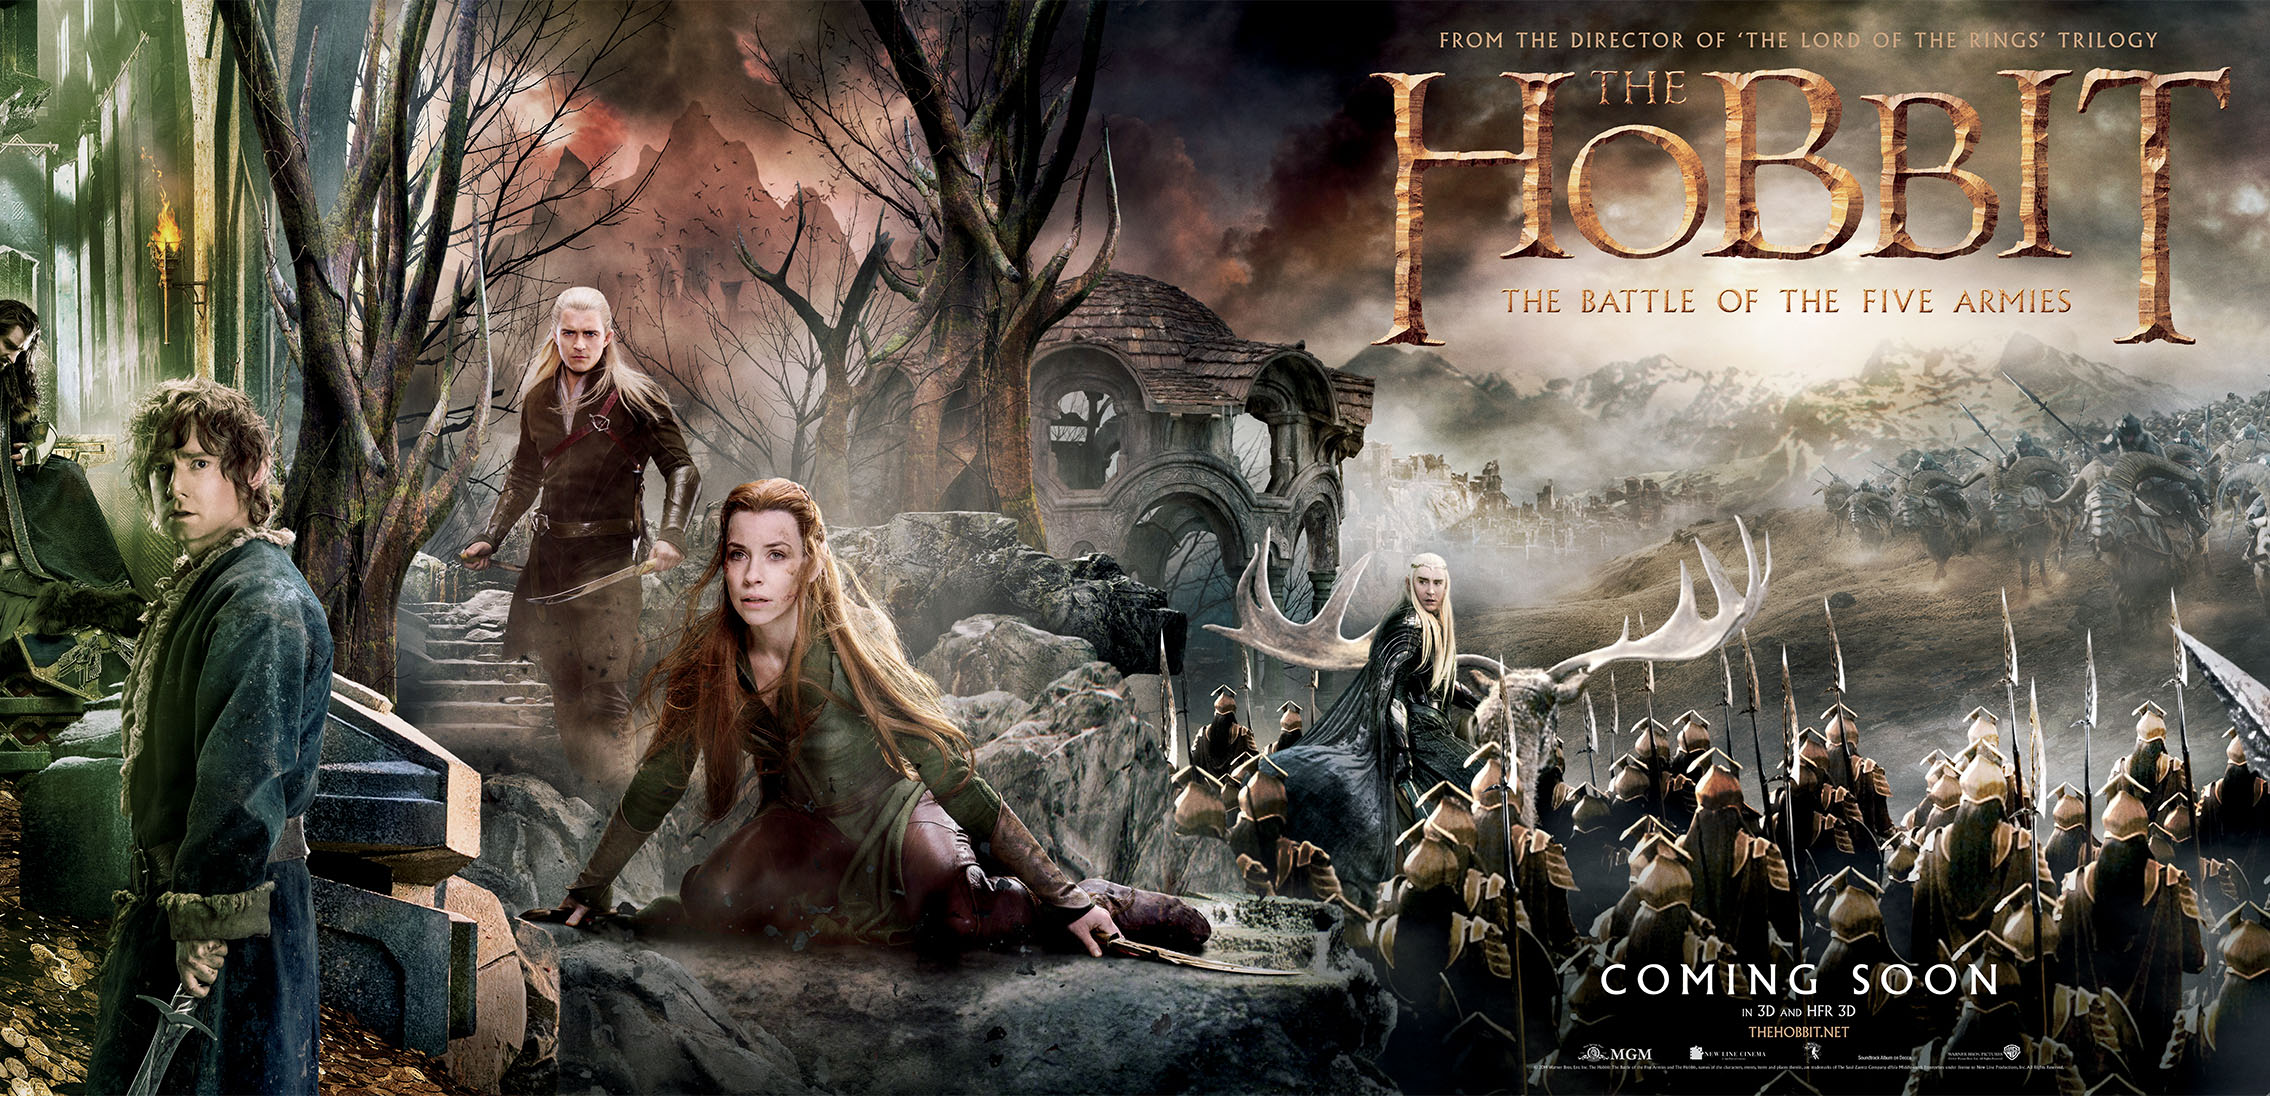 The Hobbit: The Battle Of The Five Armies #10